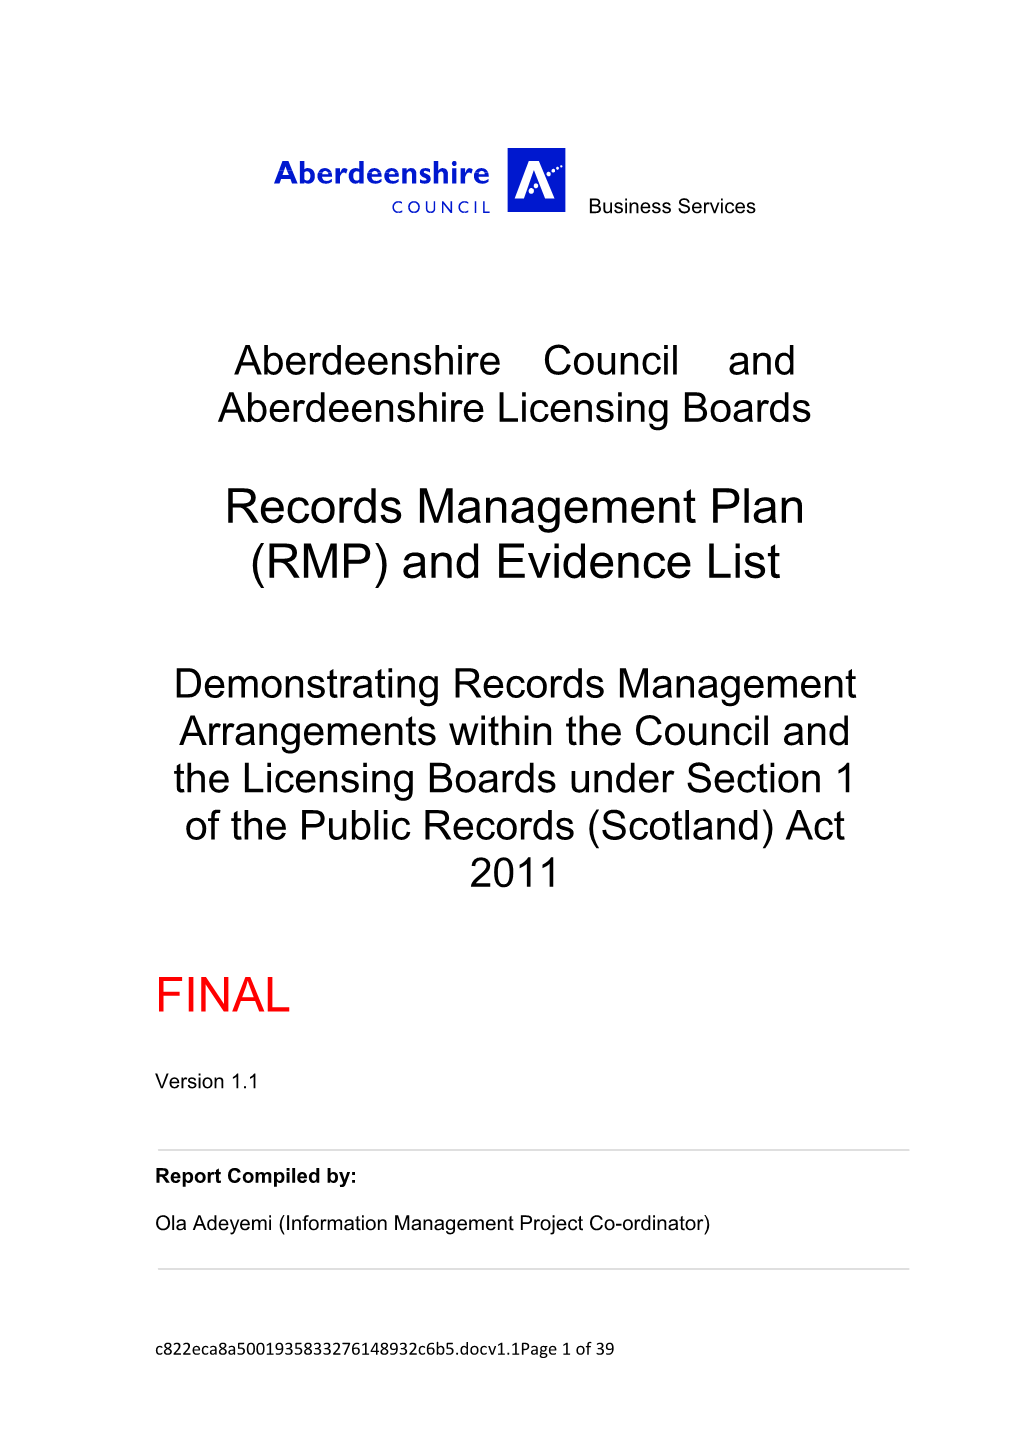 Aberdeenshire Council and Aberdeenshire Licensing Boards